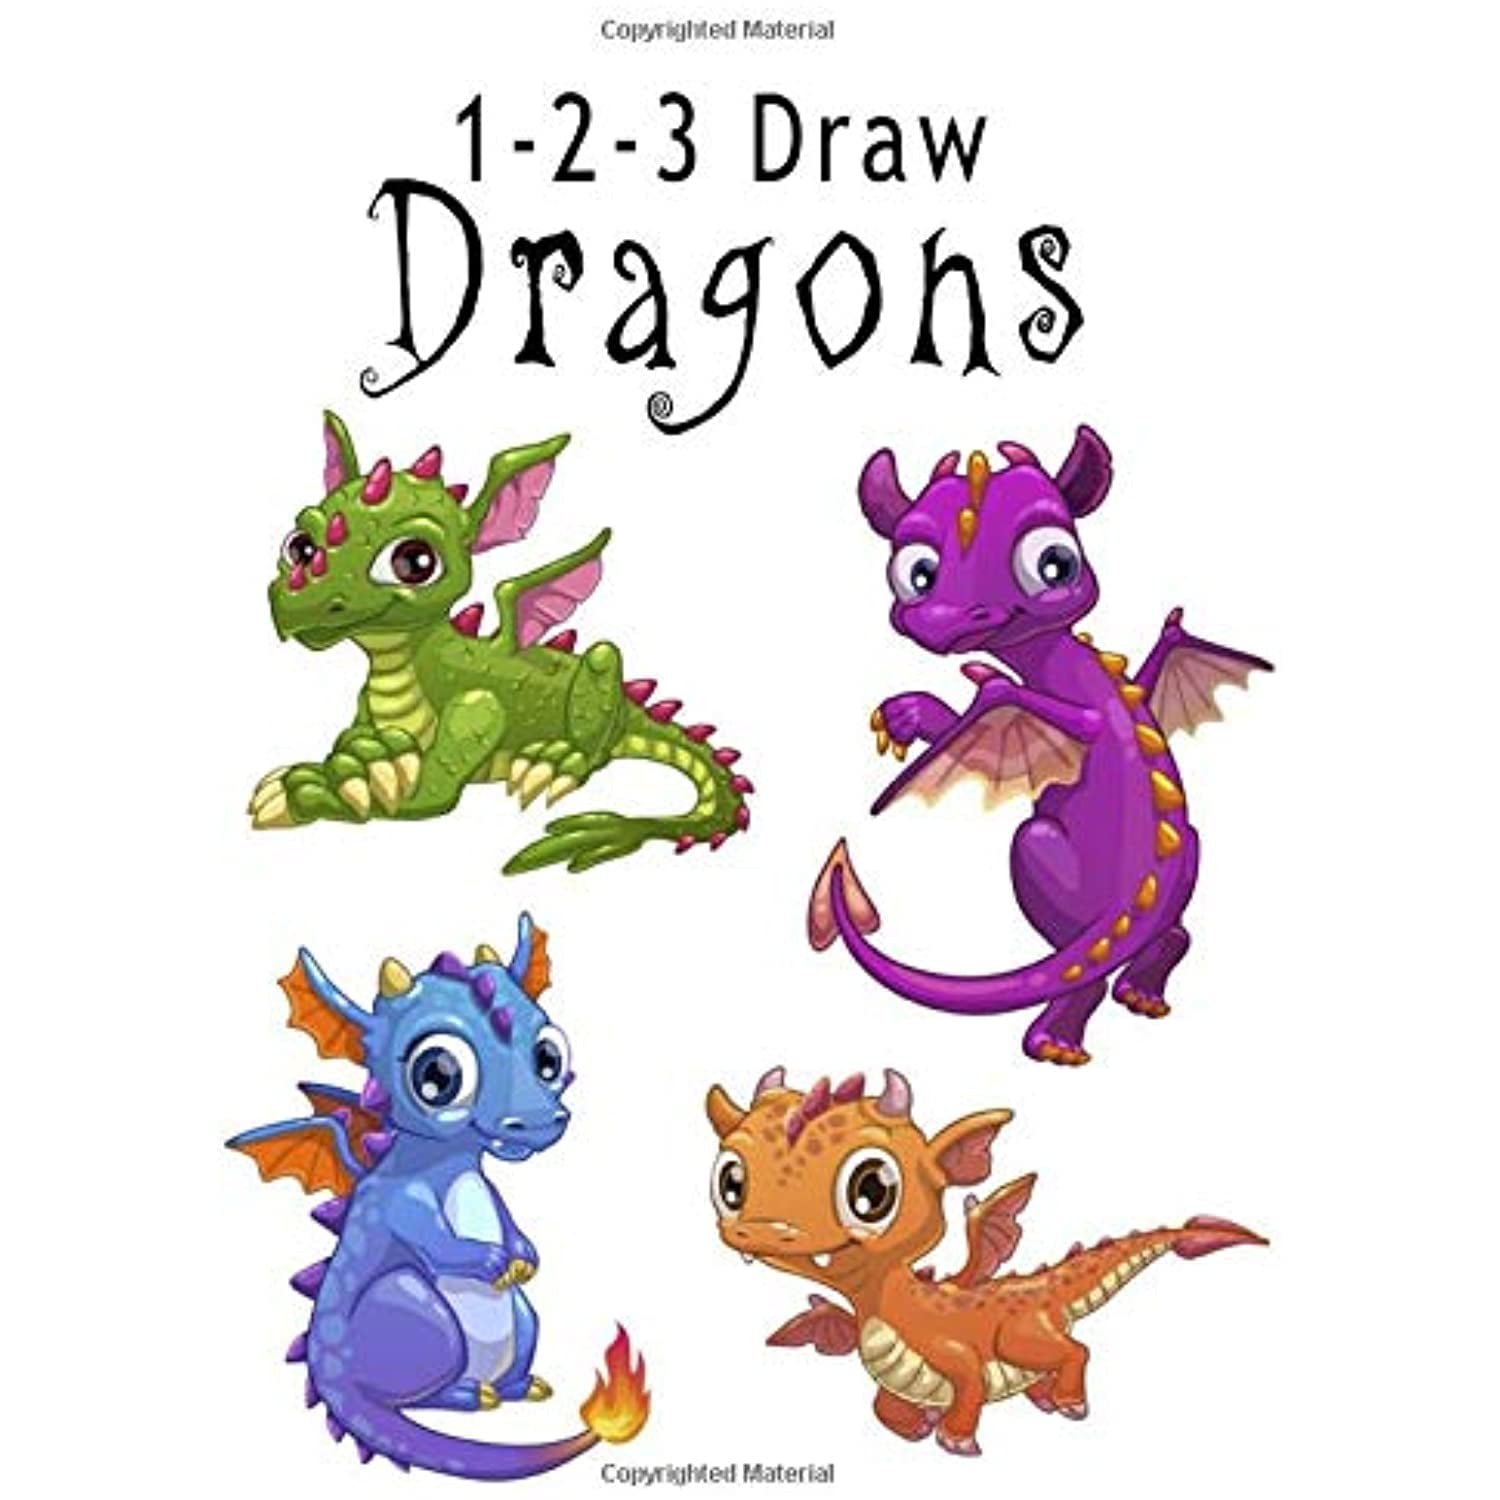 1-2-3 Draw Dragons: How to Draw Dragons Wings of Fire, Drawing Amazing  Dragons, How to draw Dragons Stuff, How to Draw Dragons Books for Kids, How  to Draw Dragons for Kids 9-12 |